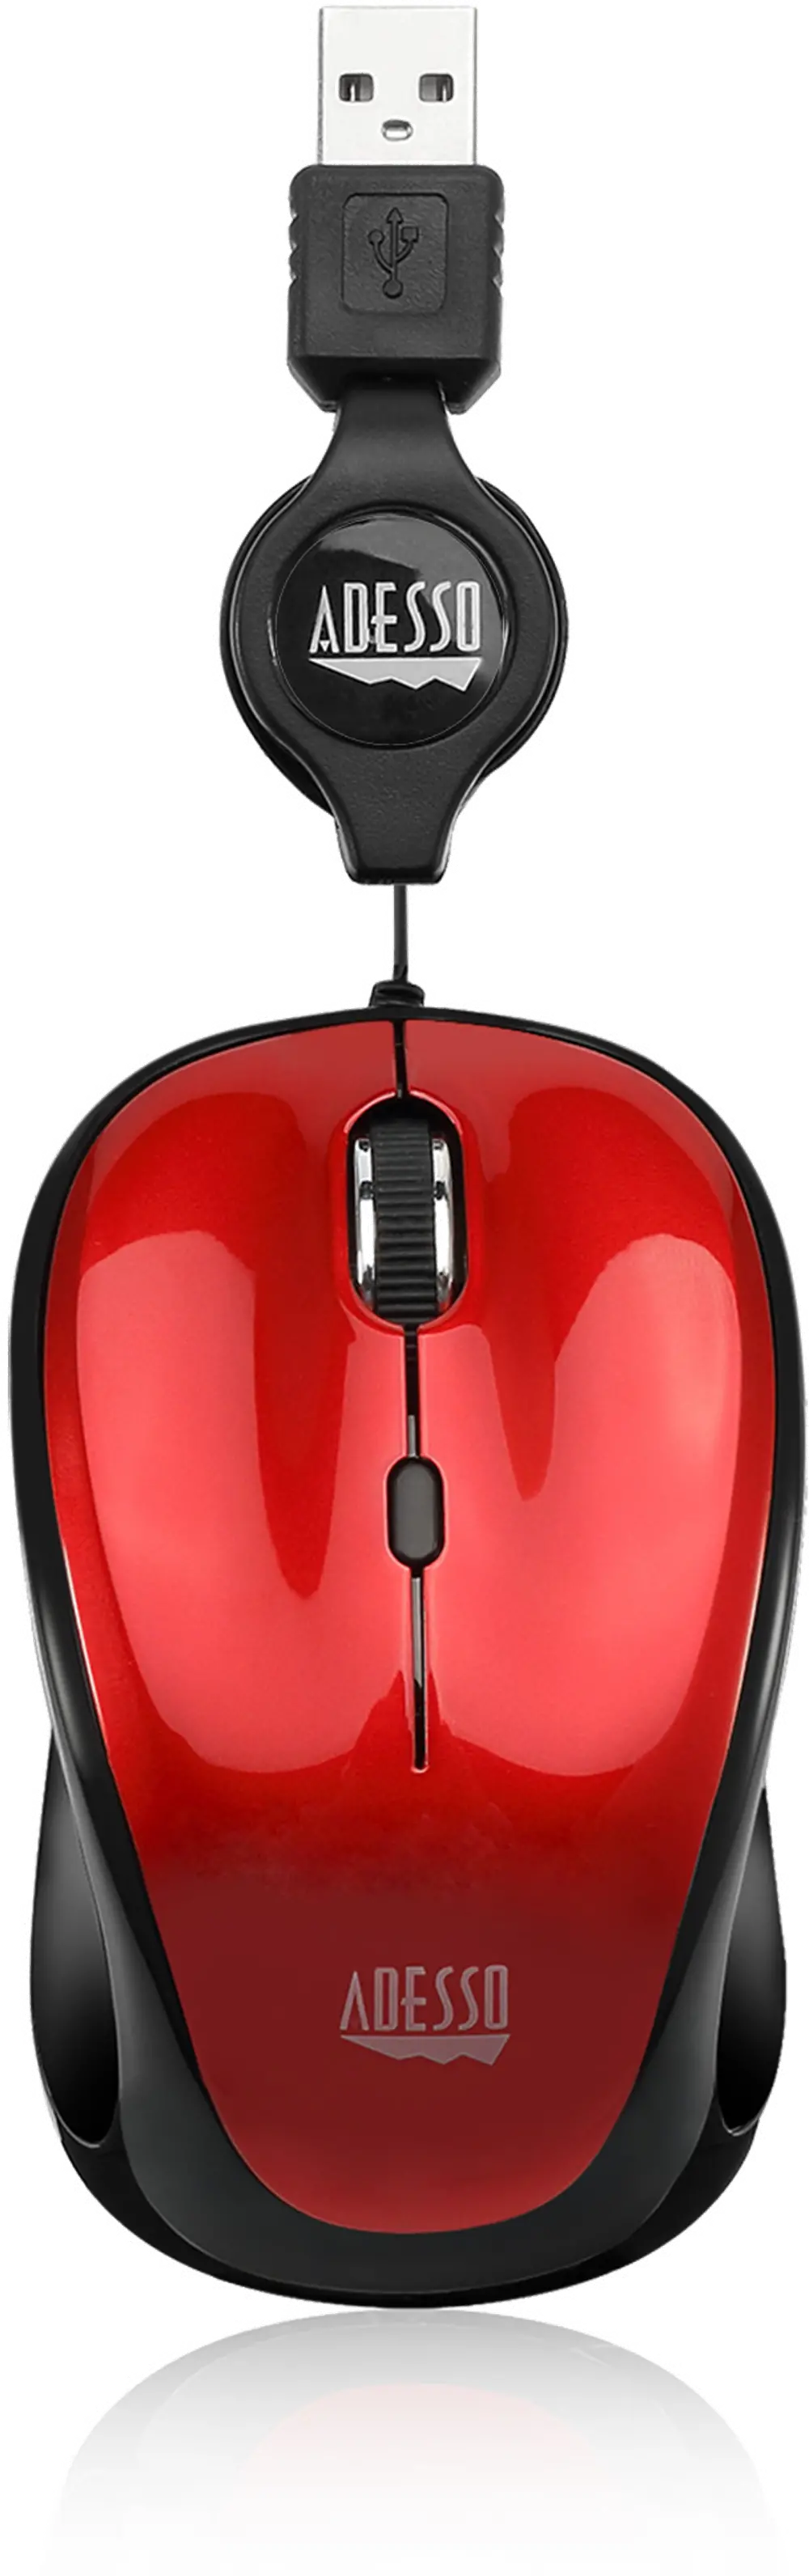 iMOUSE-S8 RED Adesso Red USB Illuminated Retractable Mouse - iMouse S8-1